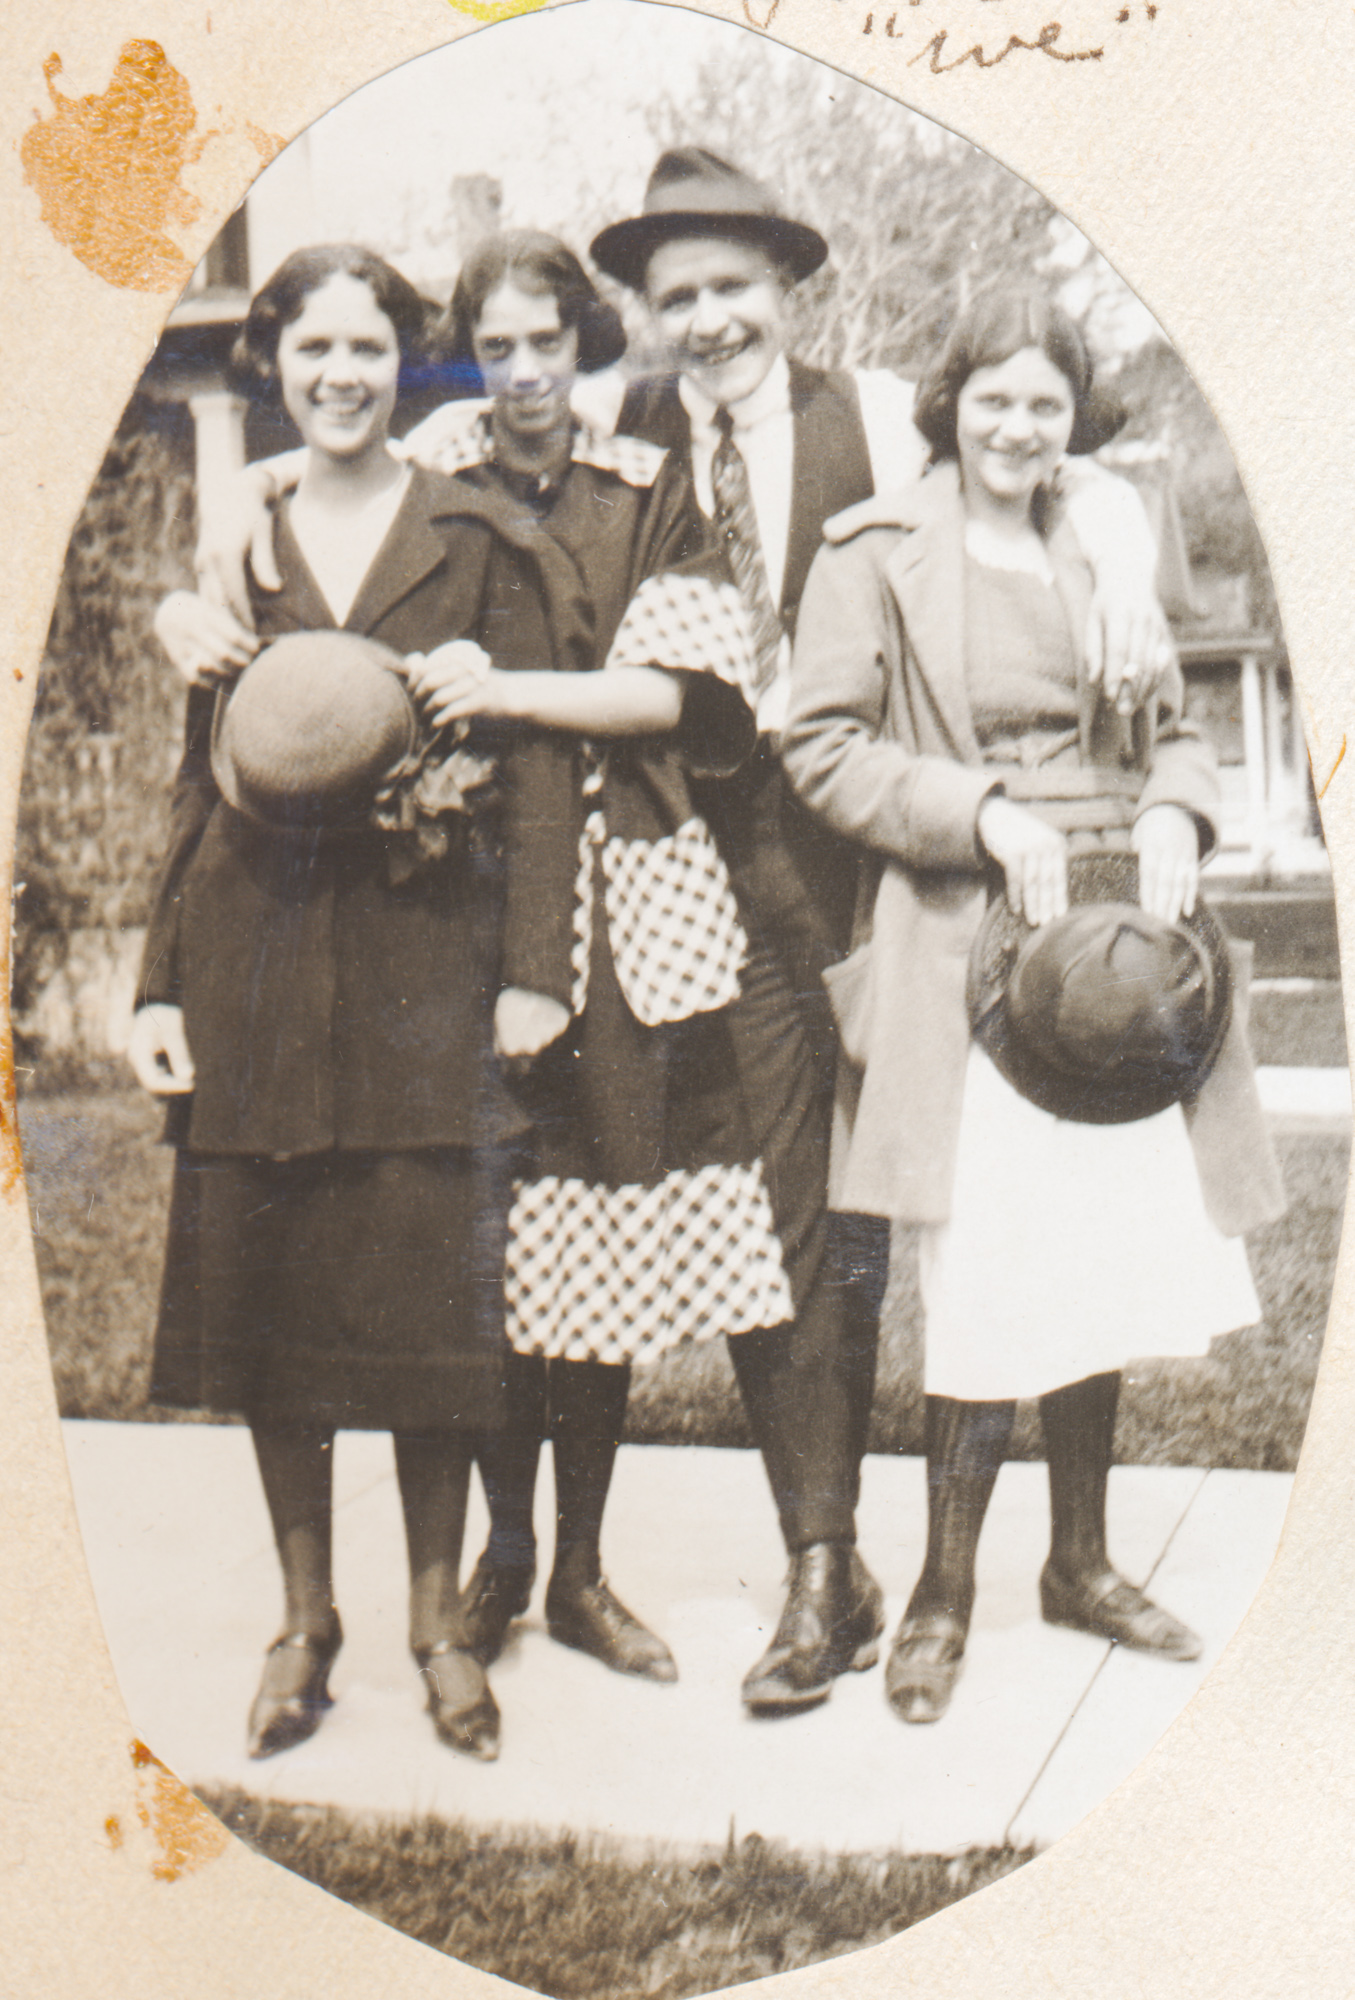 Dauth Family Archive - 1920 - Elizabeth Dauth With Friends